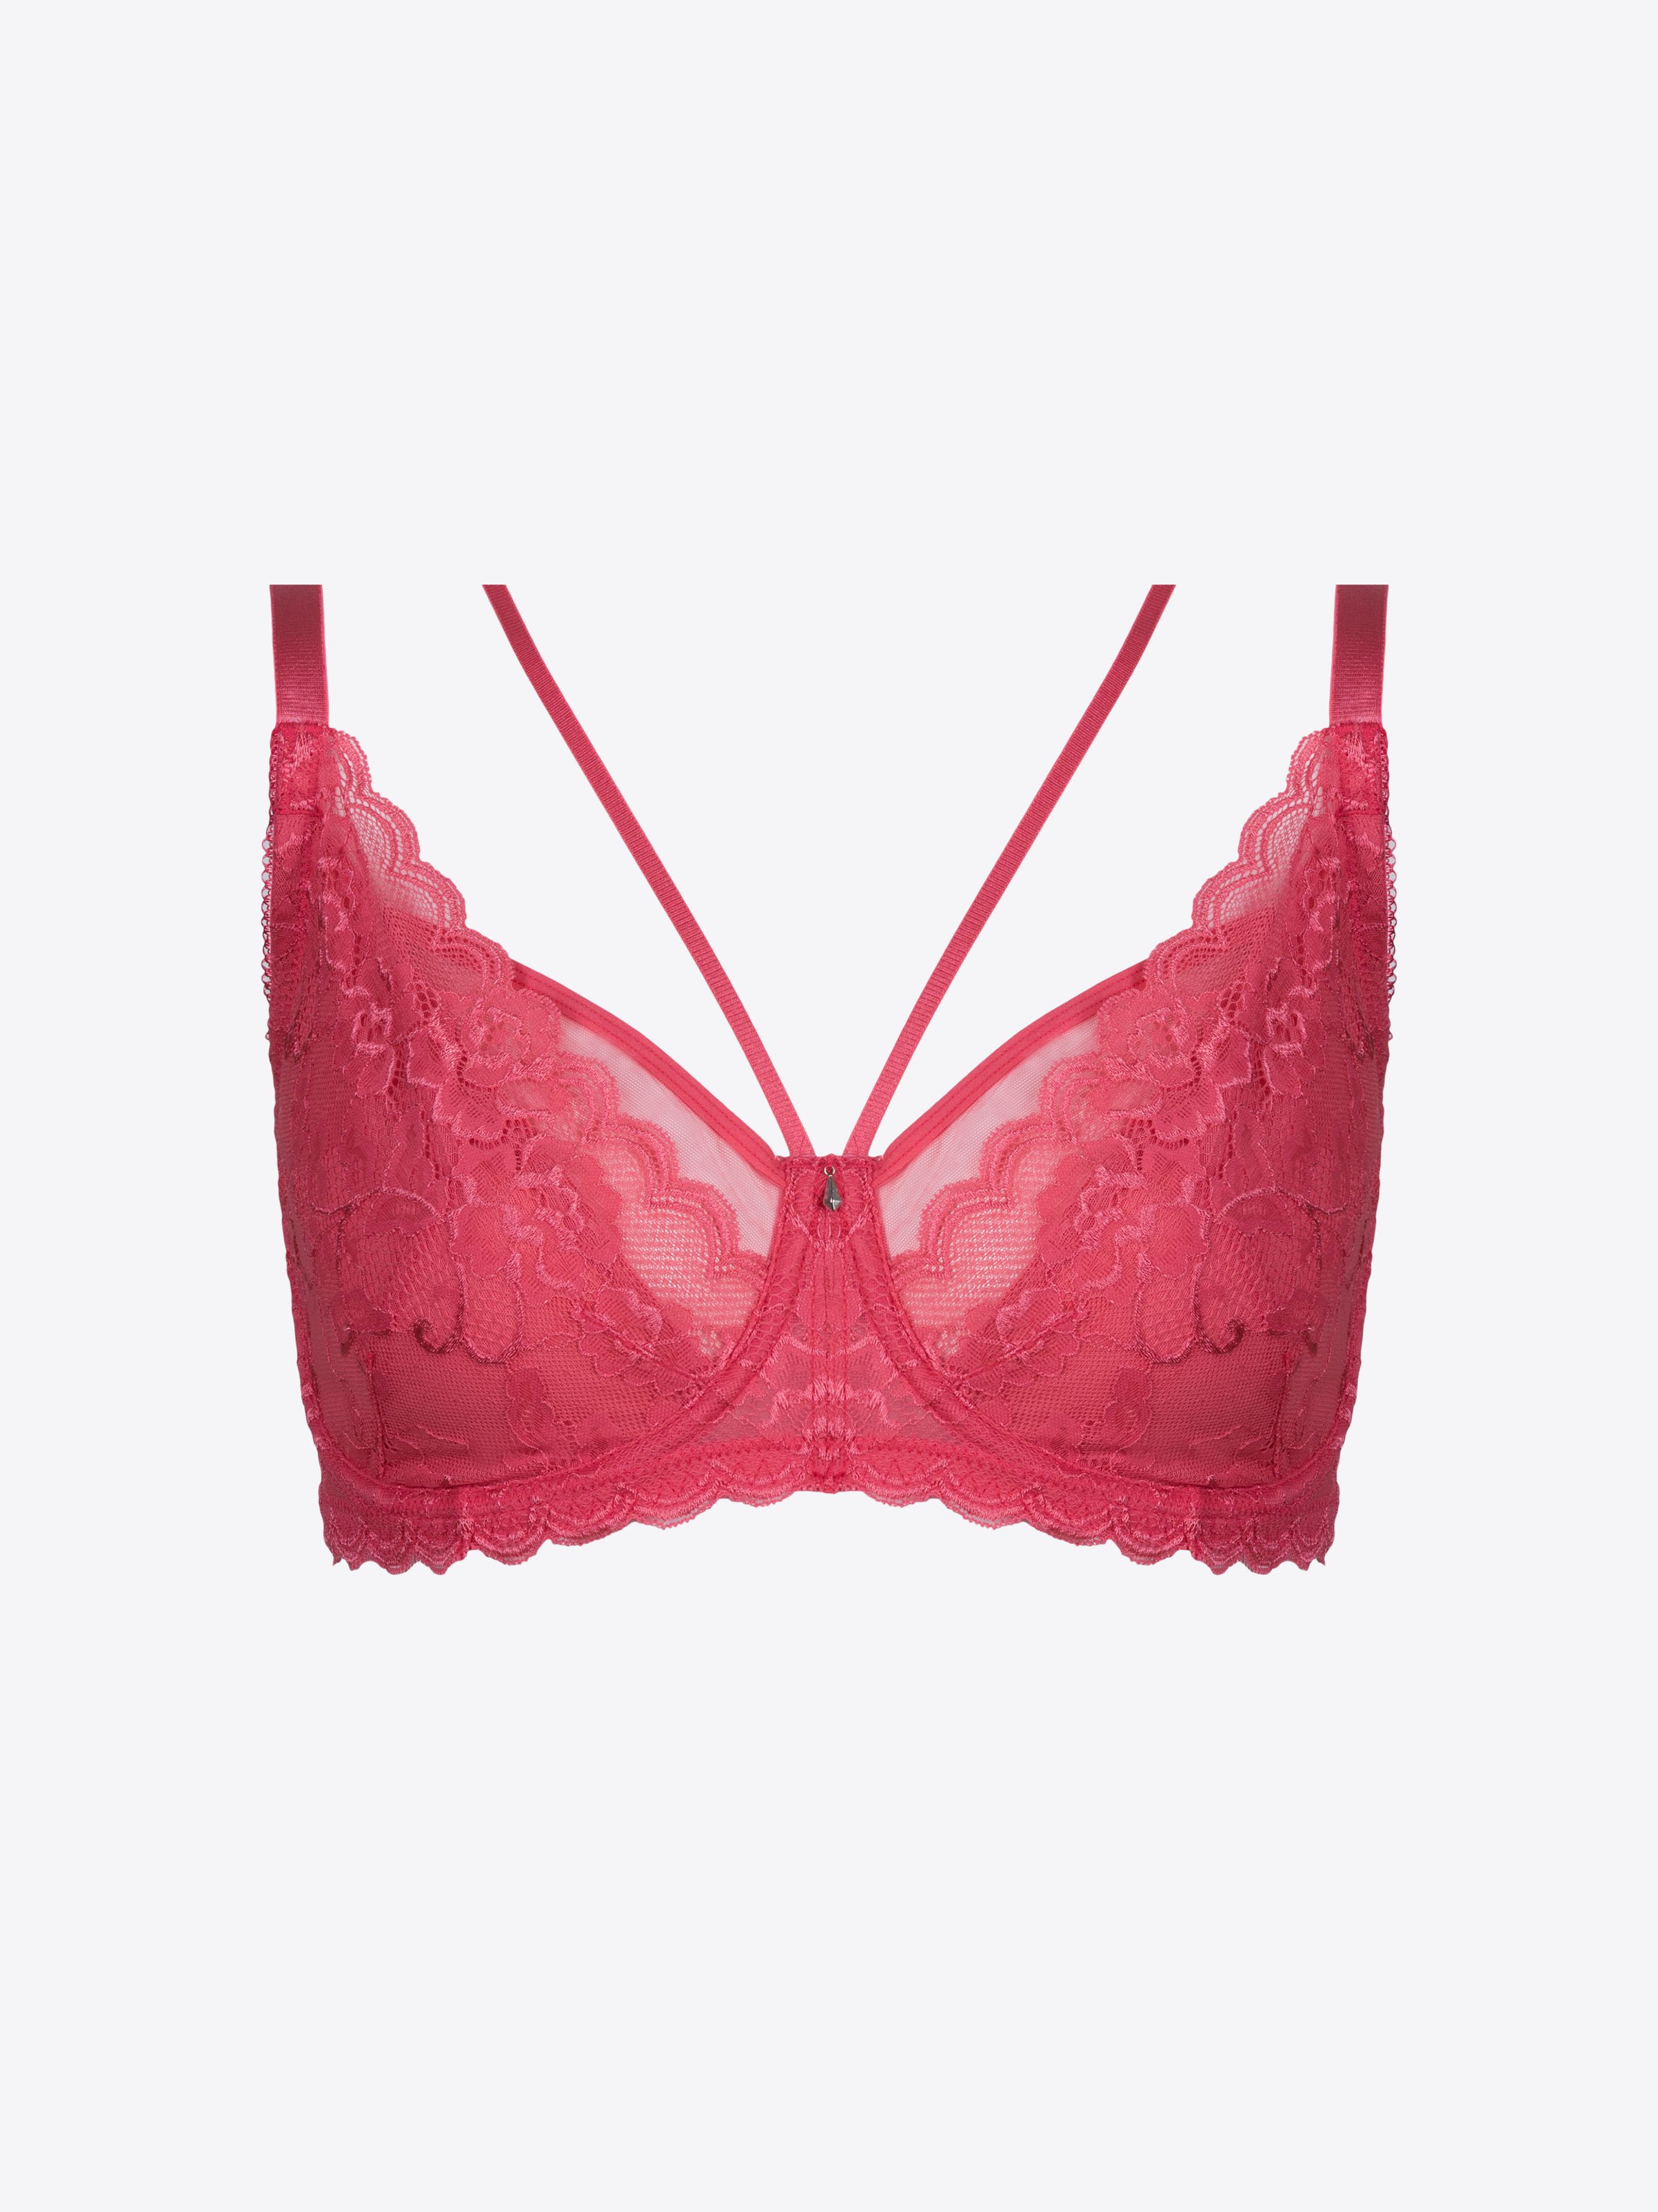 Clearance - Bras - Page 4 - Les Modes Ancora Inc. Now That's Lingerie.ca